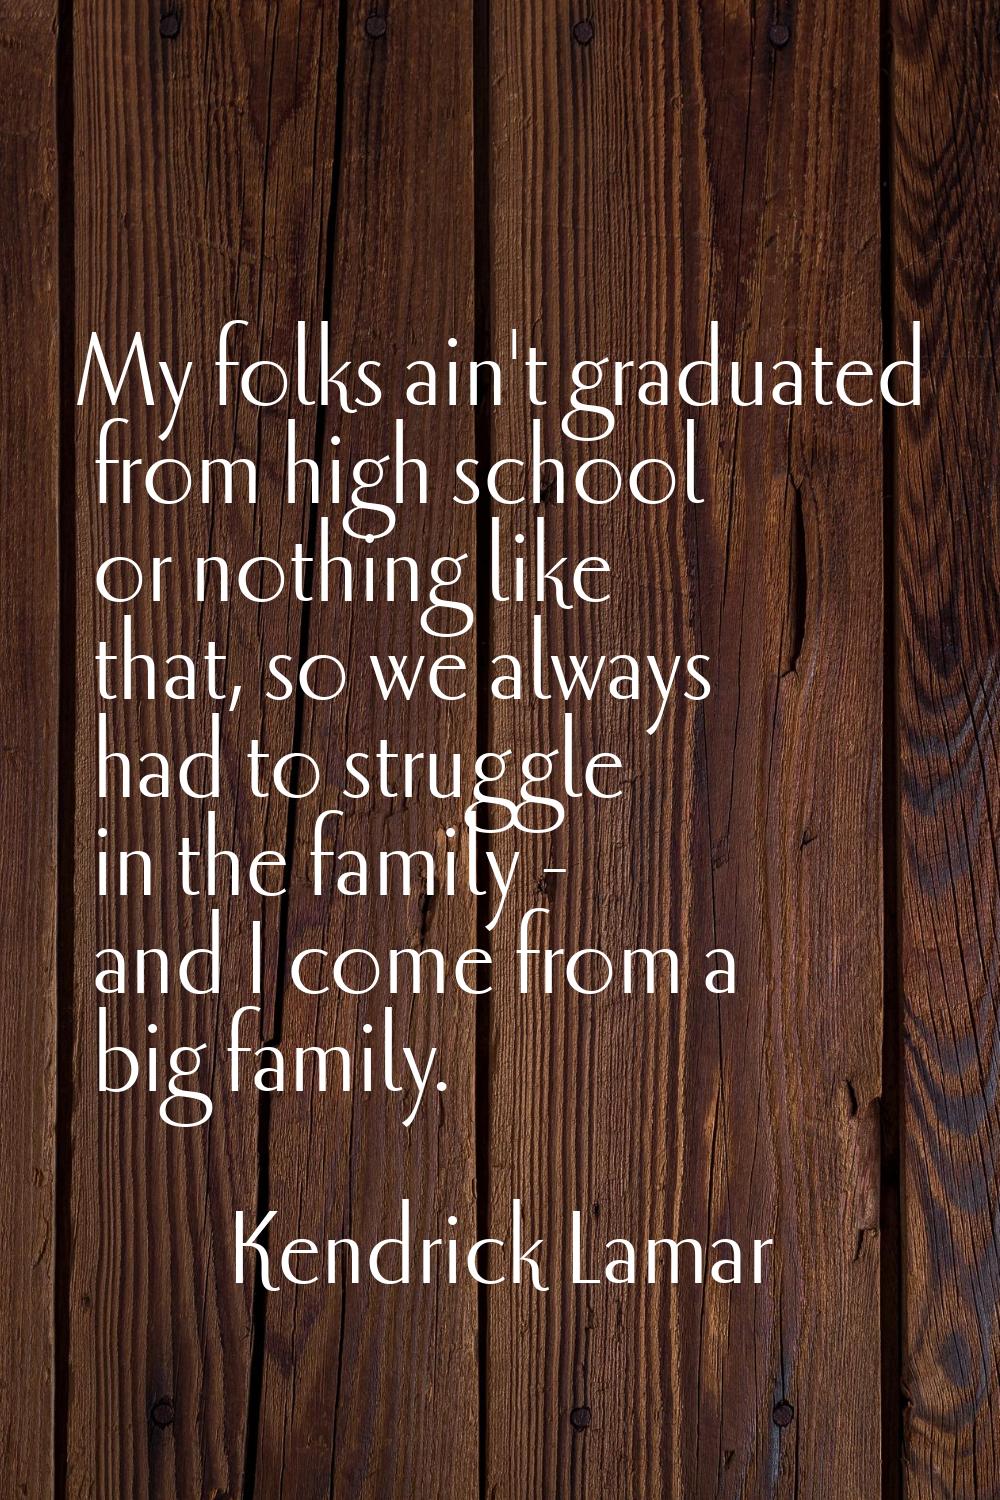 My folks ain't graduated from high school or nothing like that, so we always had to struggle in the